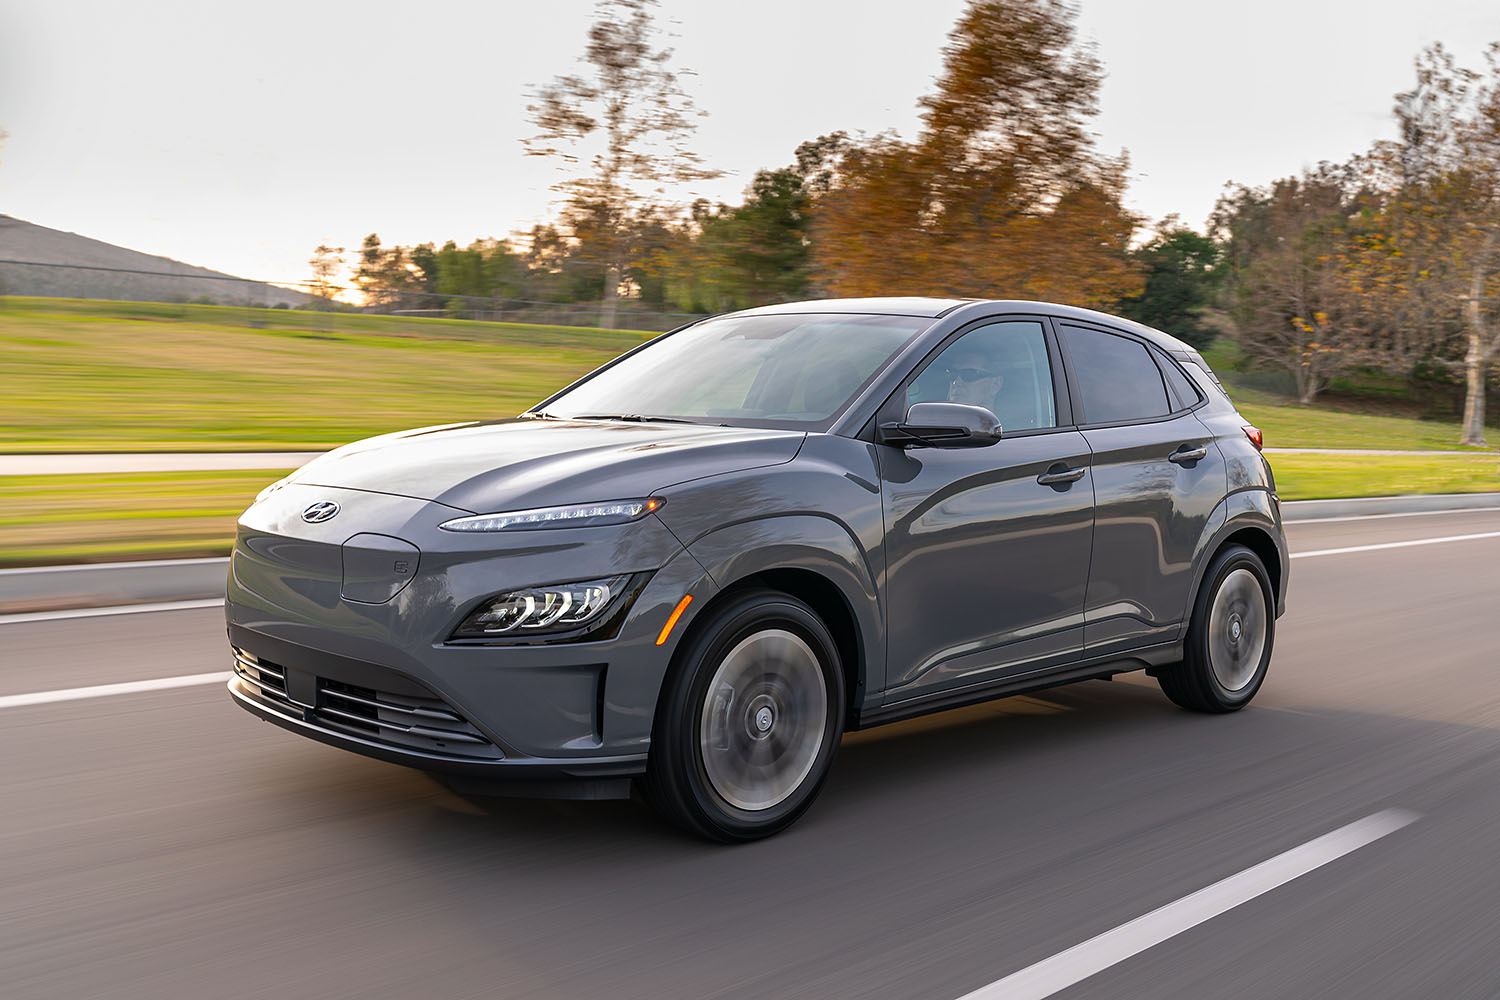 2023 Hyundai Kona Electric in gray driving along a tree-lined parkway